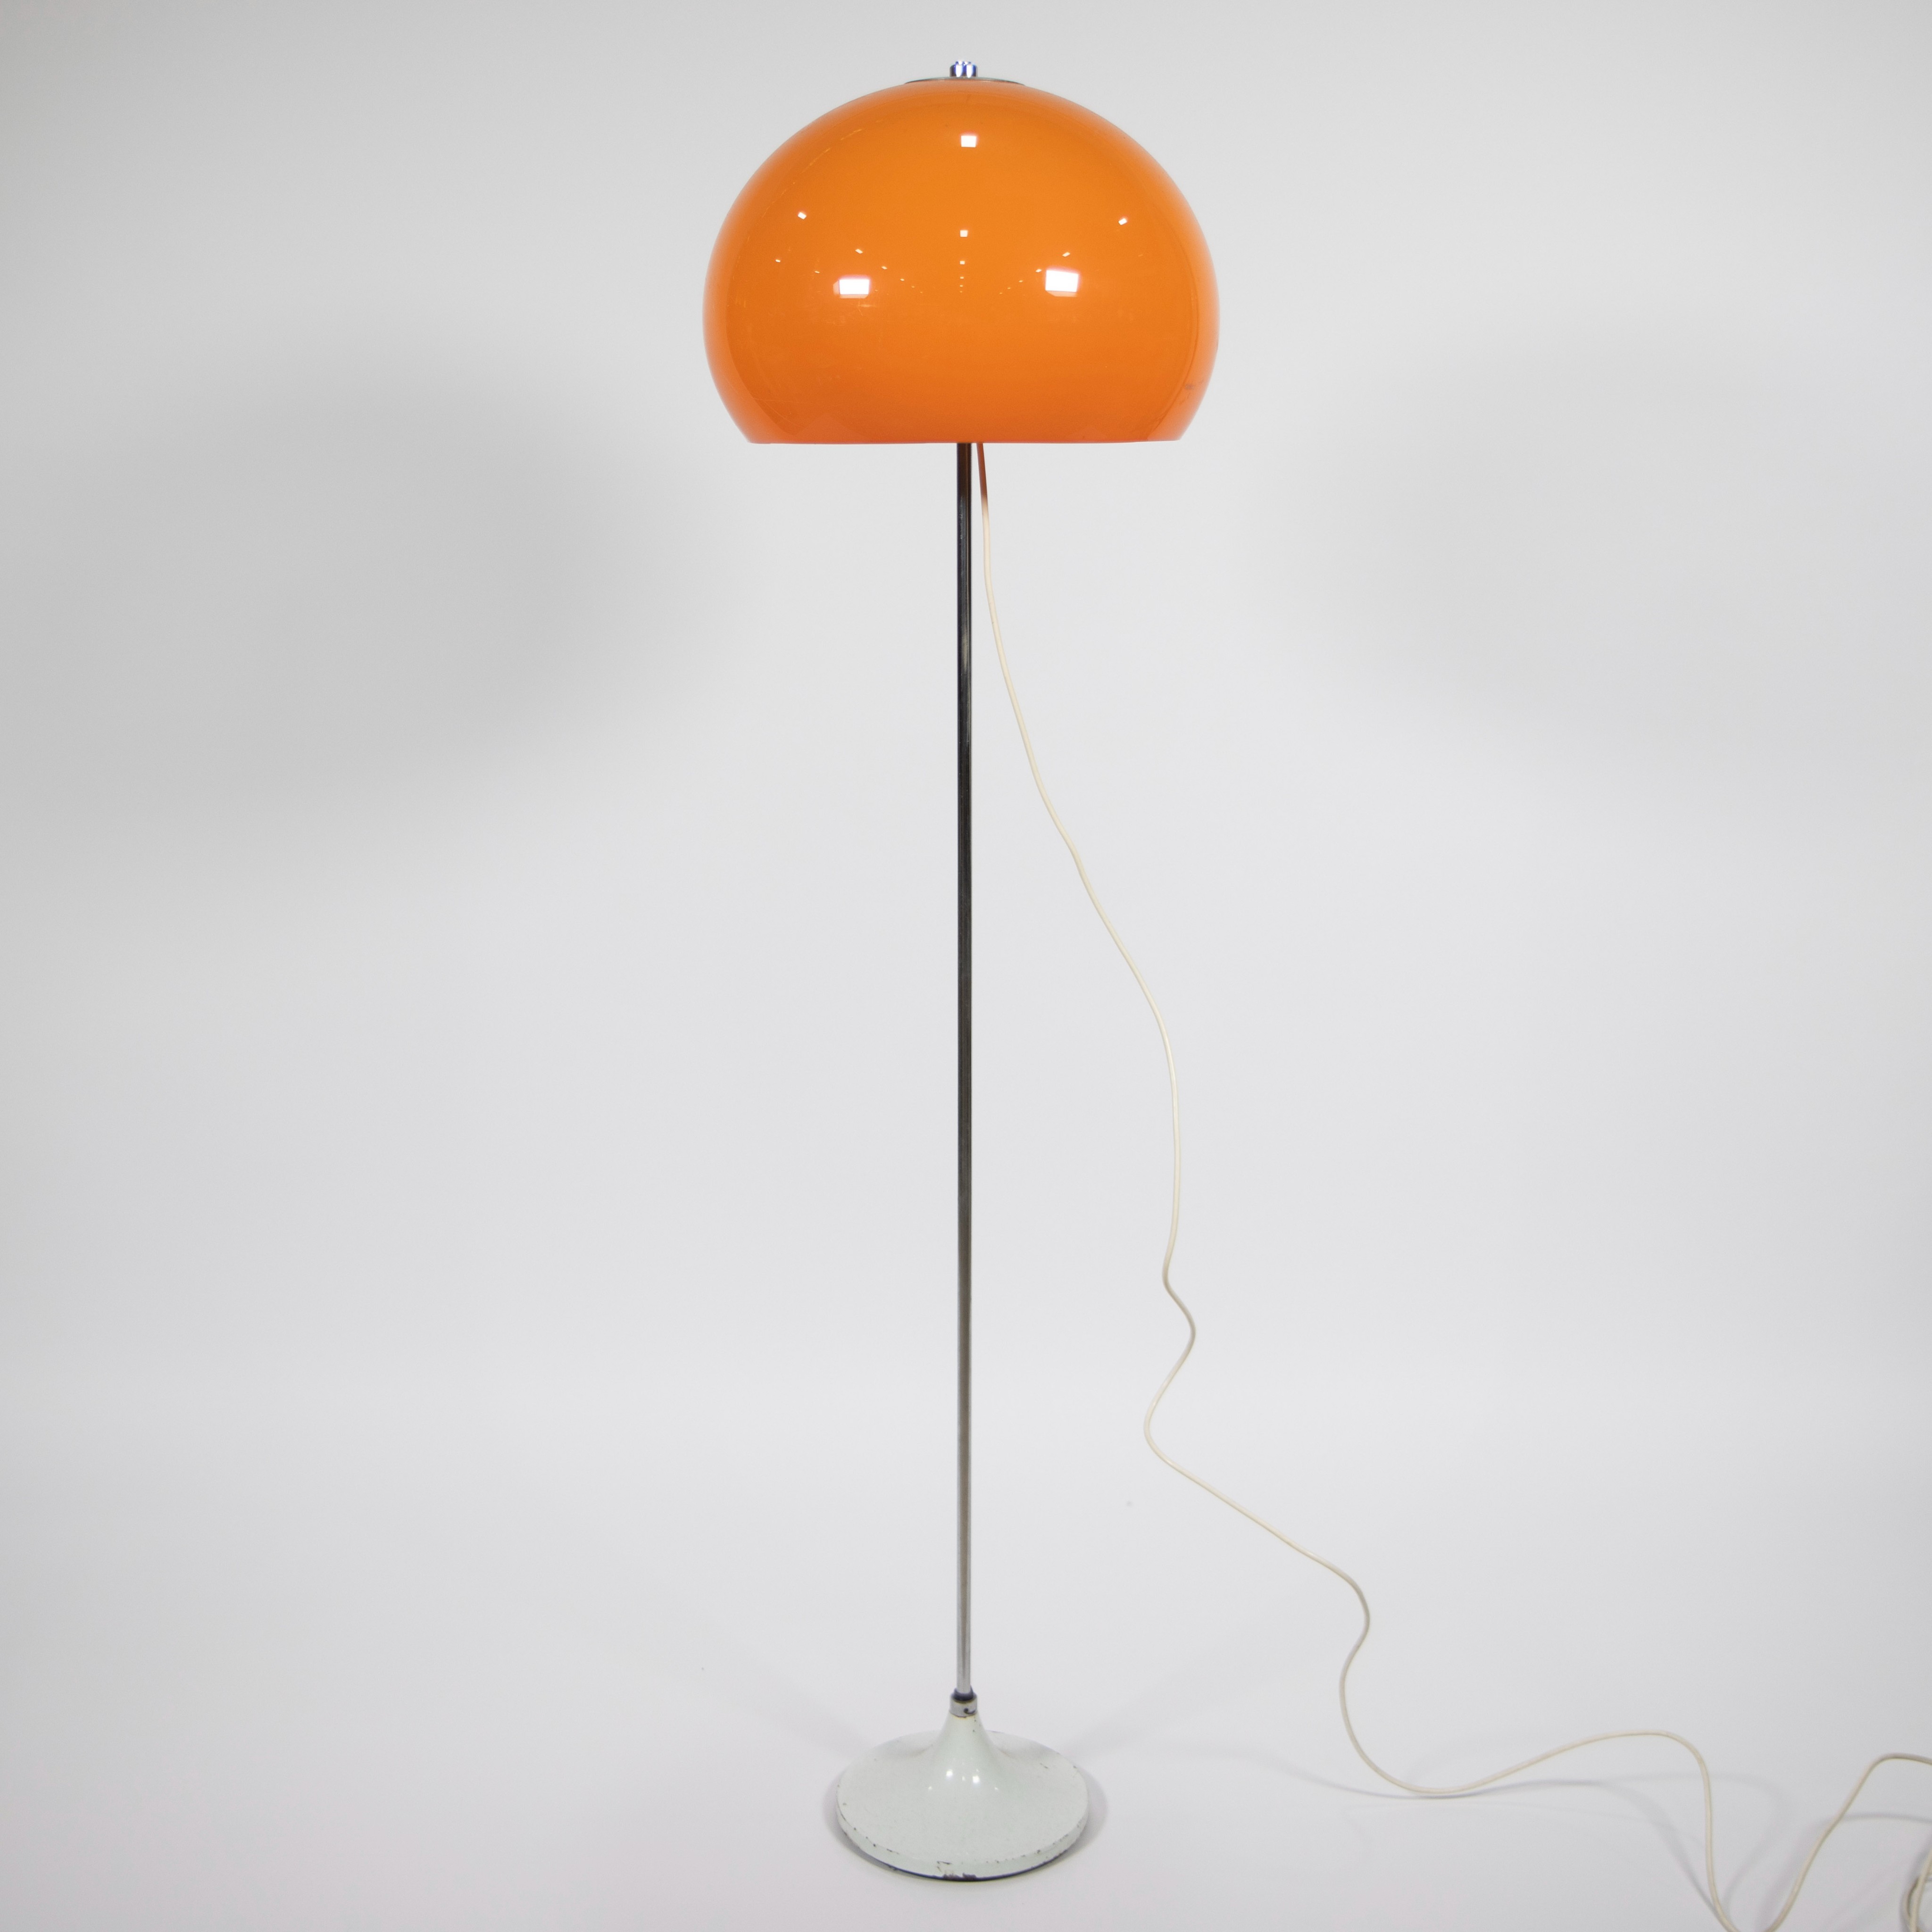 'mushroom' floor lamp probably by Gepo (Amsterdam), 1960s - Image 4 of 5